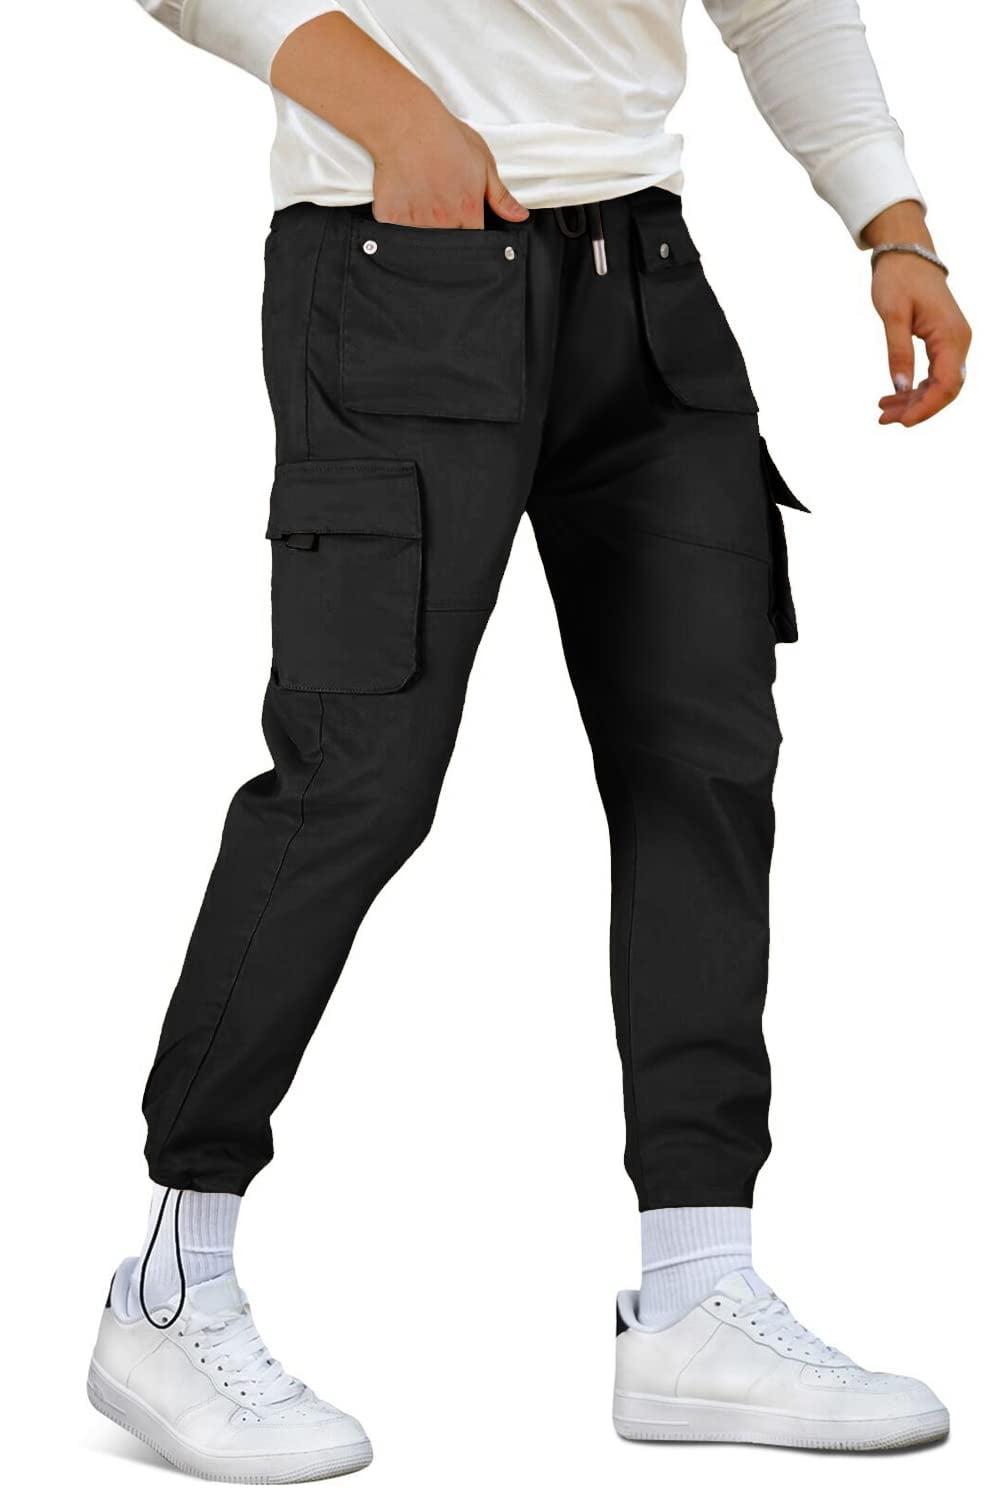 Men's Green Cargo Pant - Slim Fit For Sale – GINGTTO